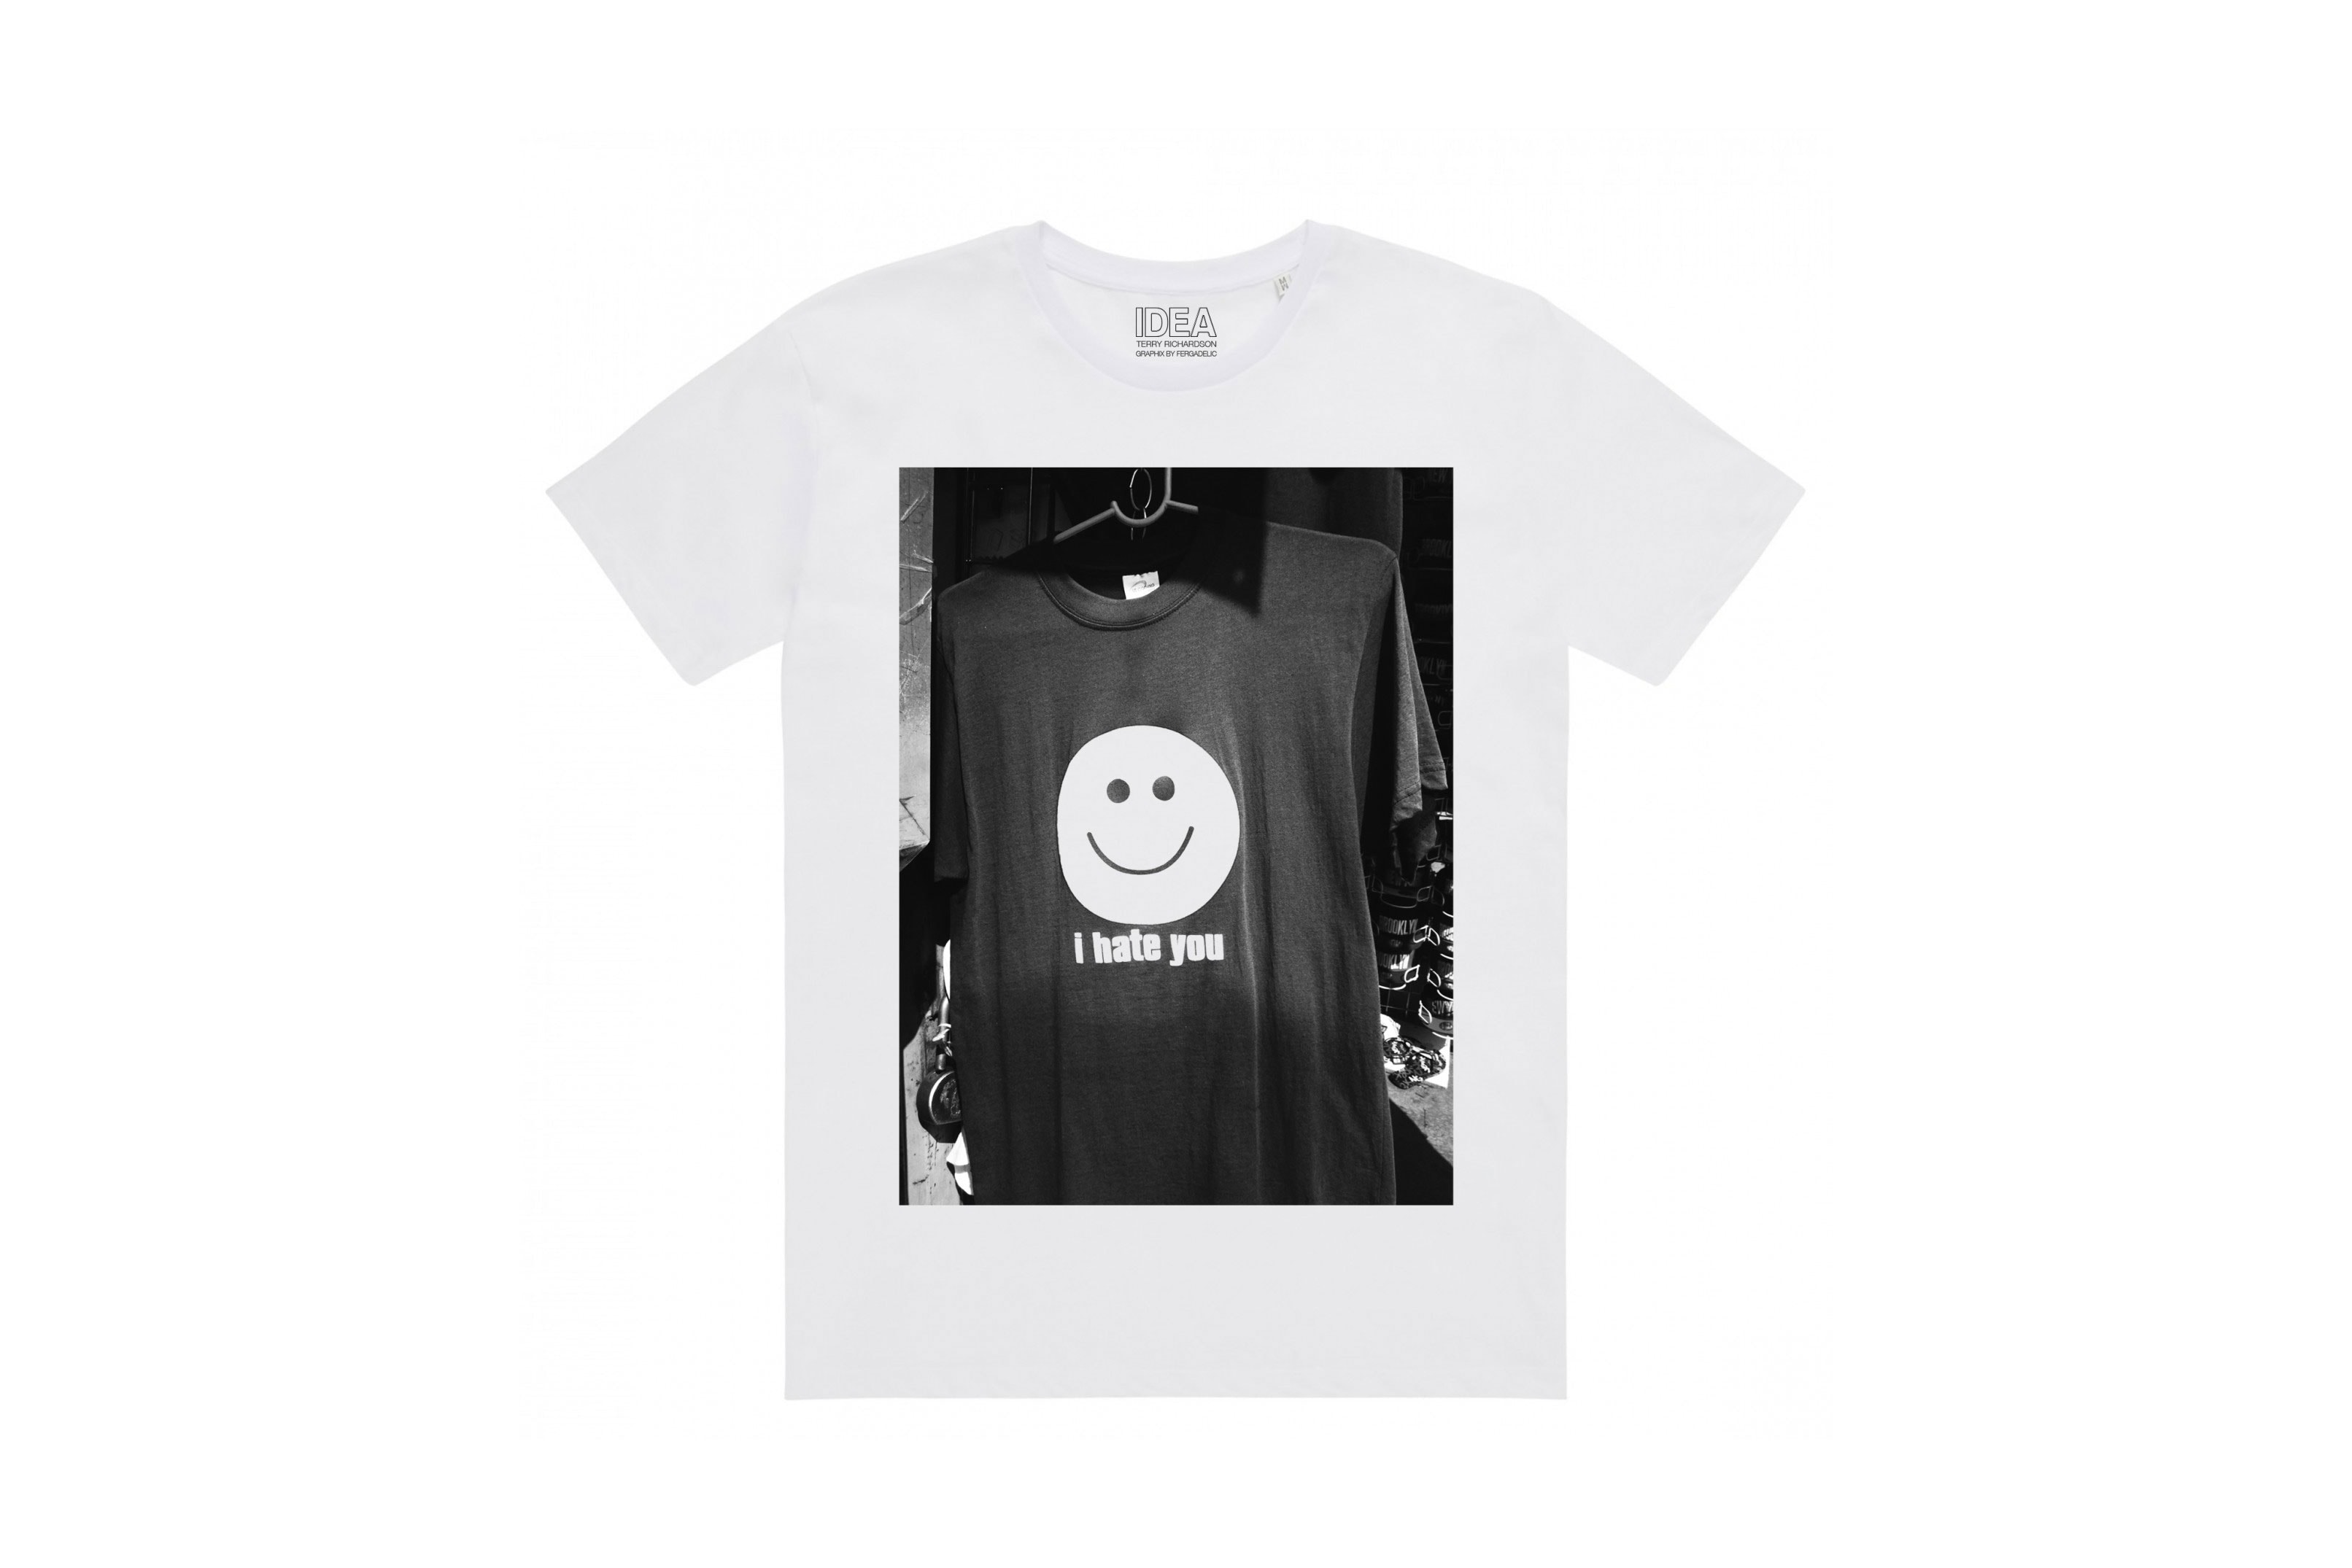 IDEA Dover Street Market Photographic T Shirt Collaboration Collection Terry Richardson